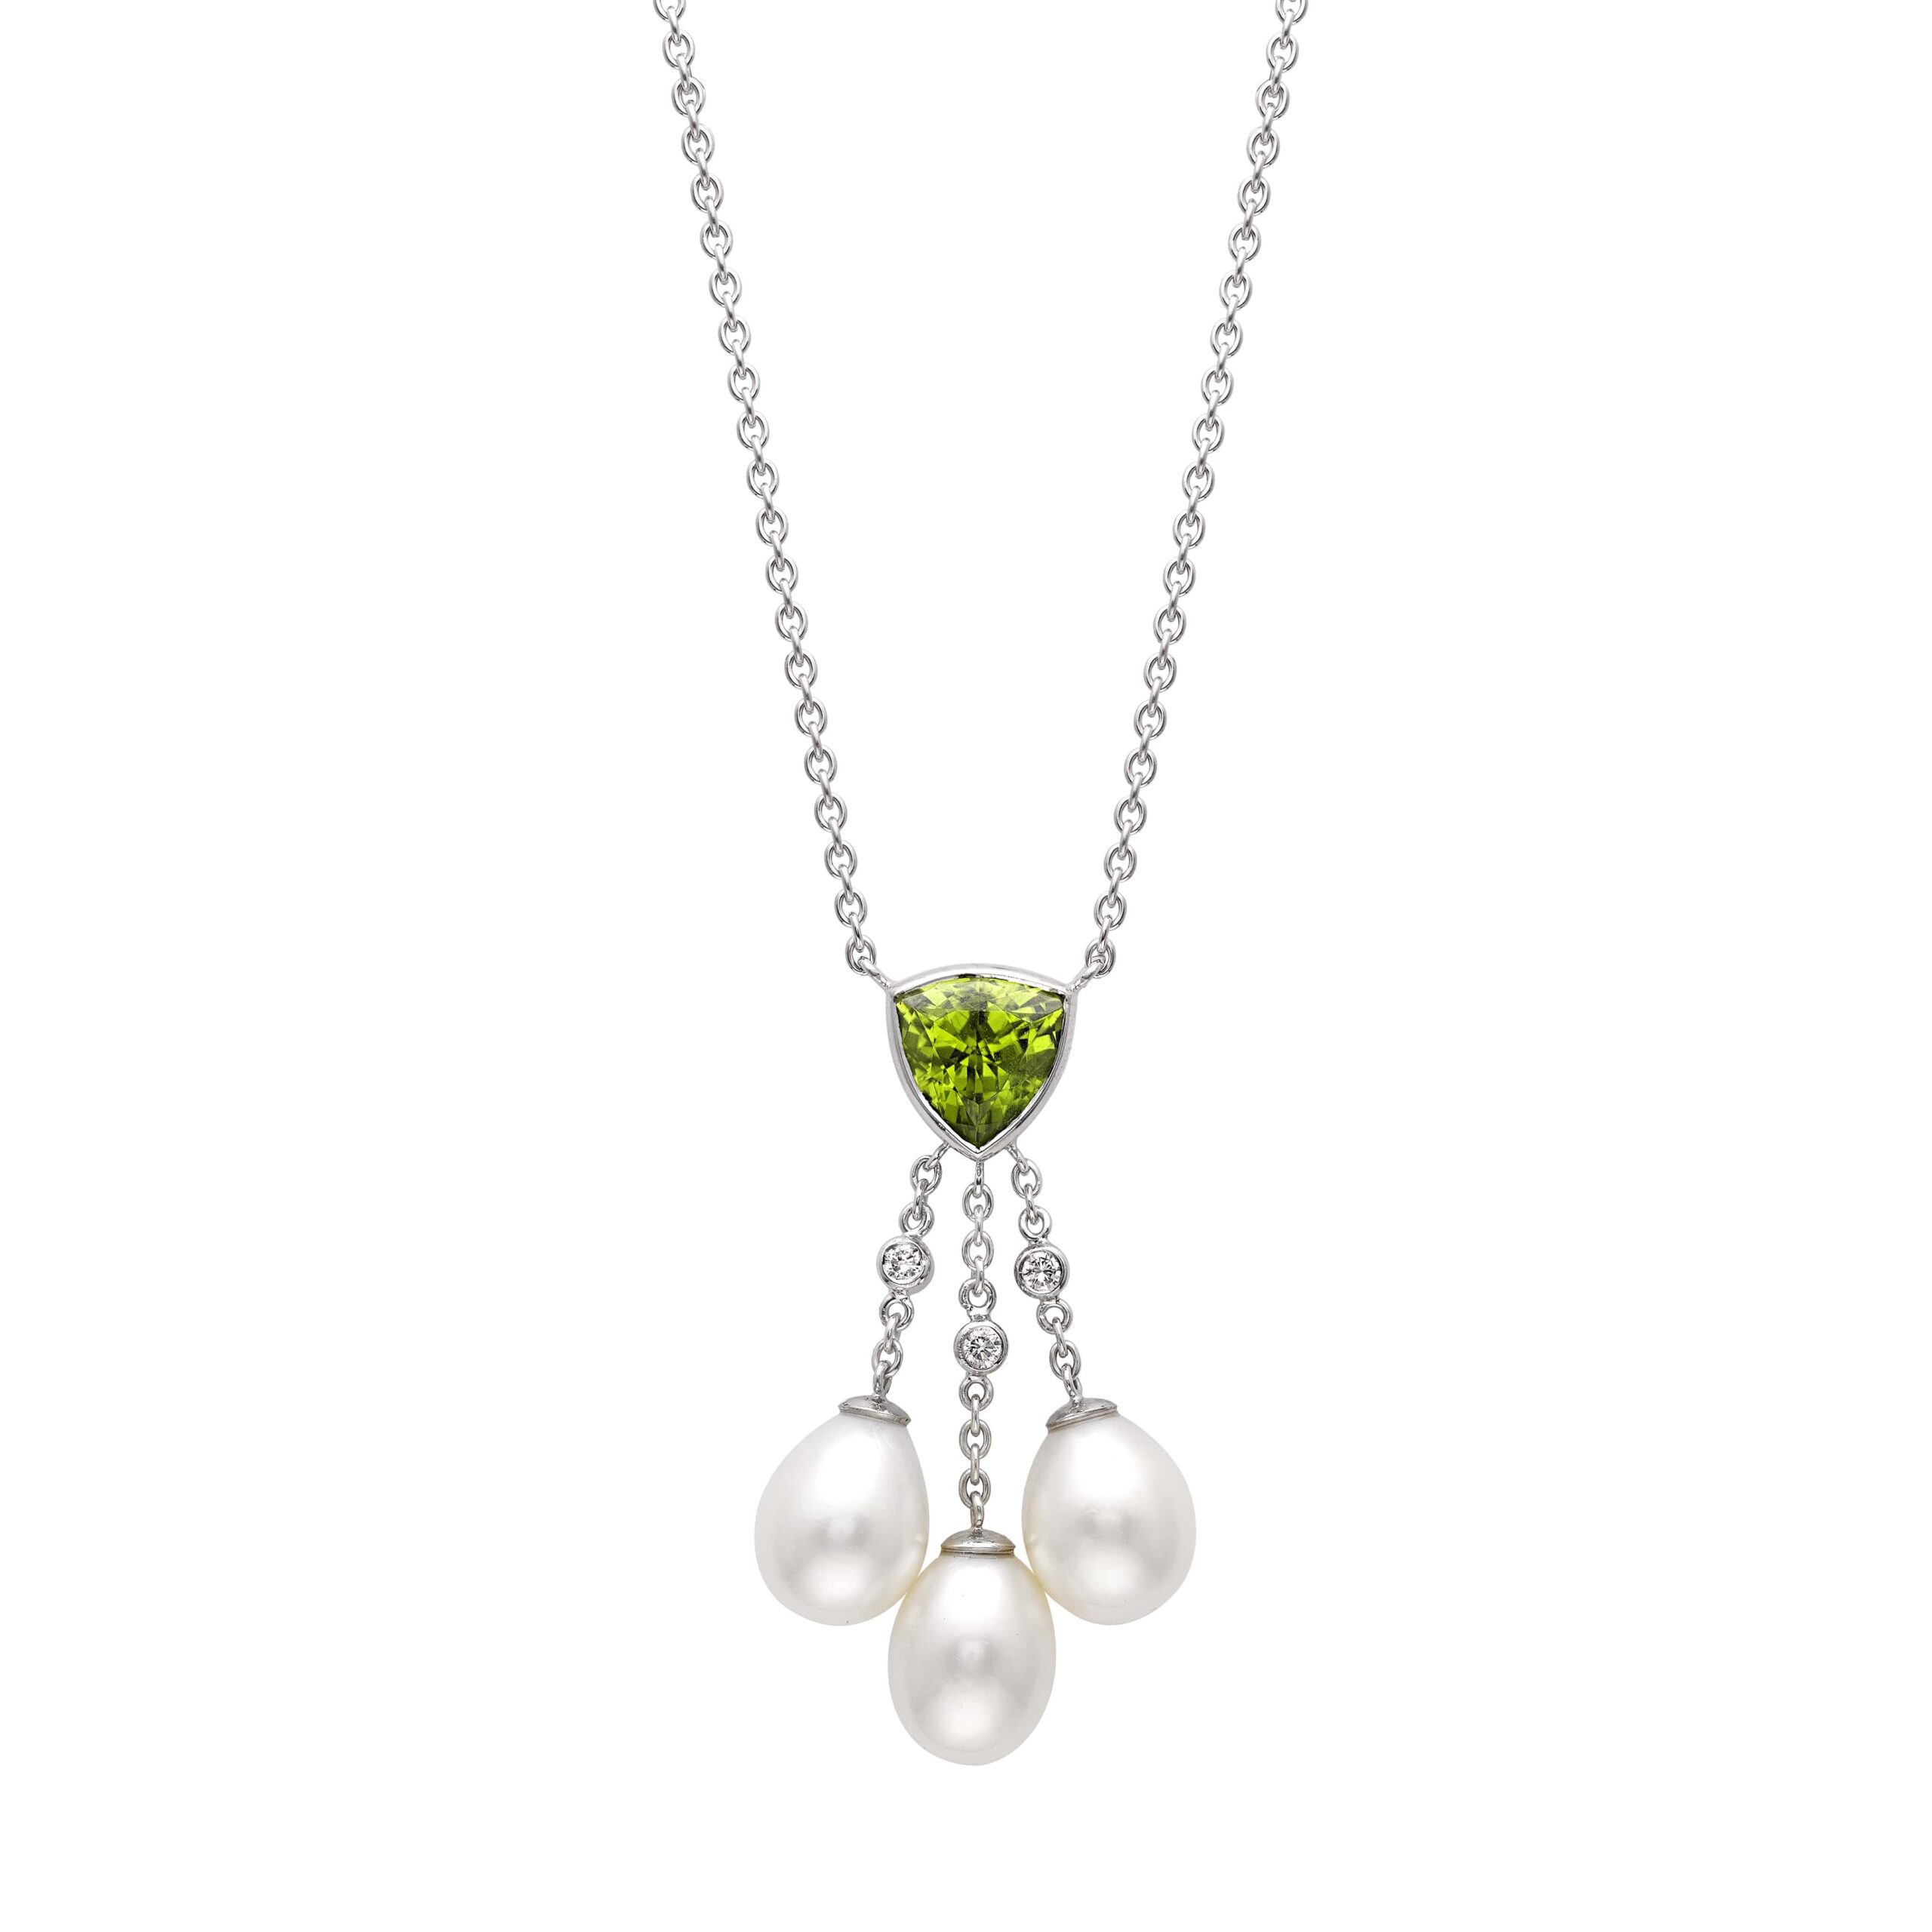 14kw 1.25ct Peridot and .06ctw Diamond Necklace - Taylor Healey Jewelry